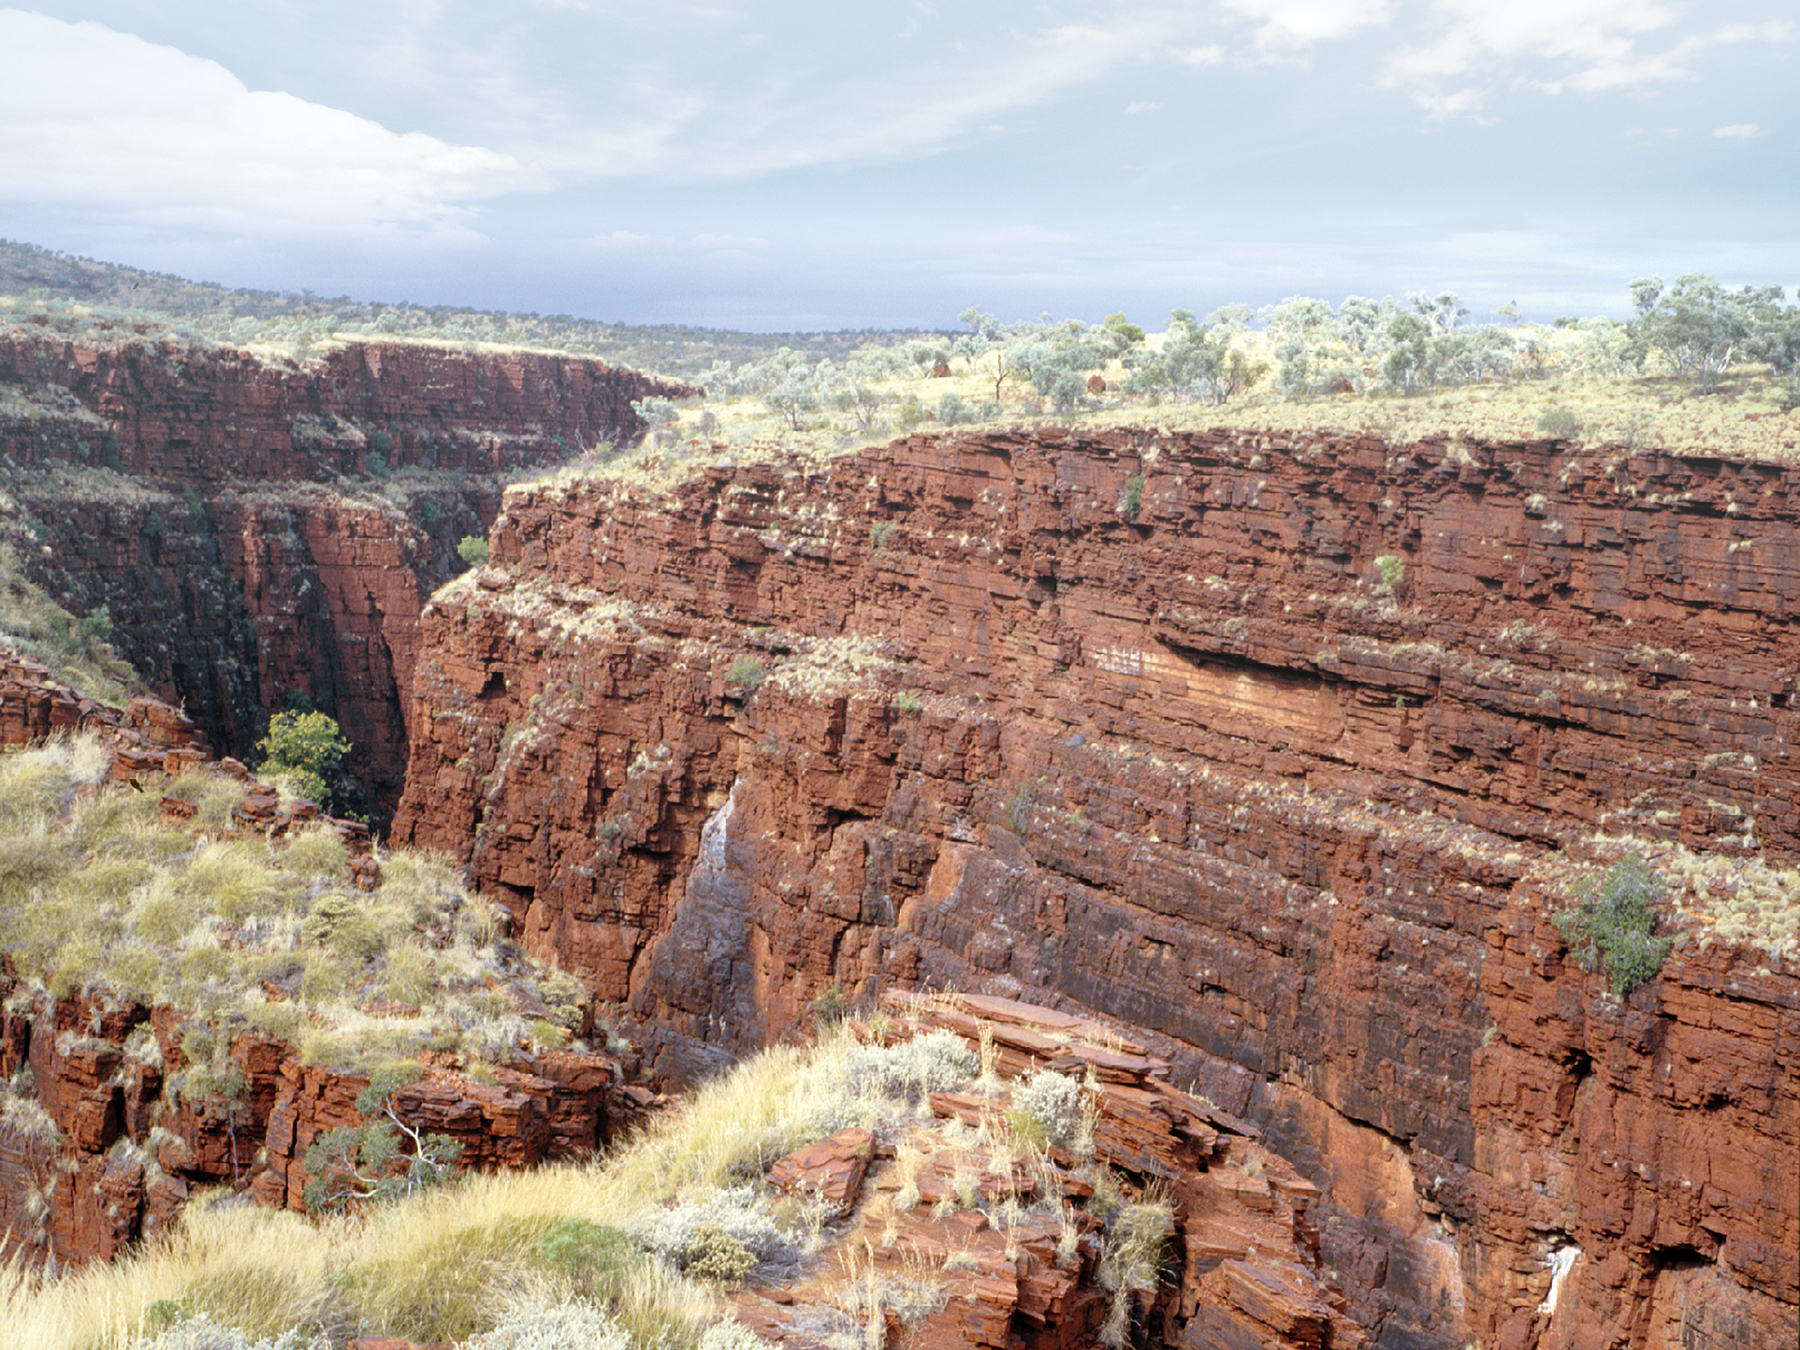 A photo of Dale's Gorge in Australia, showing banded iron rock formations that document the Great Oxyenation Event.